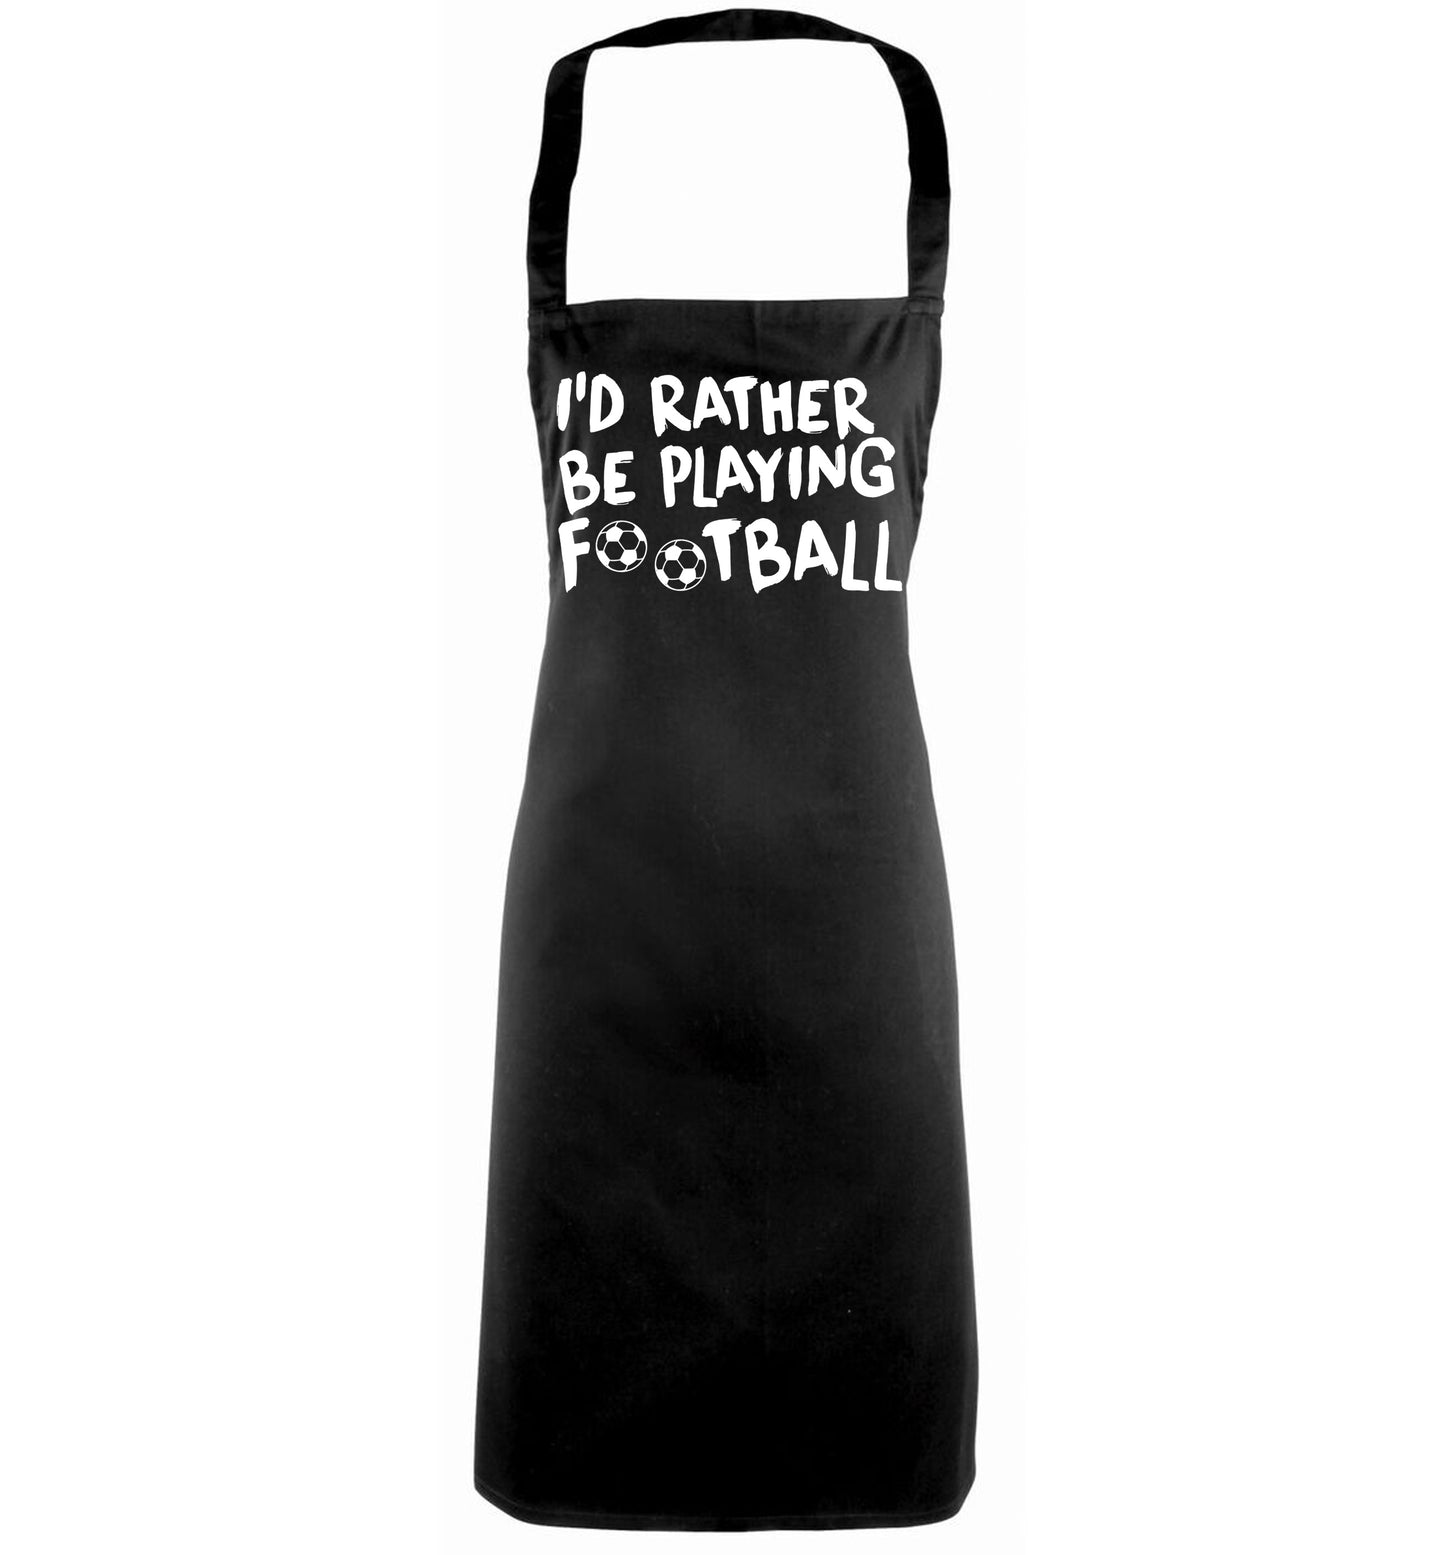 I'd rather be playing football black apron